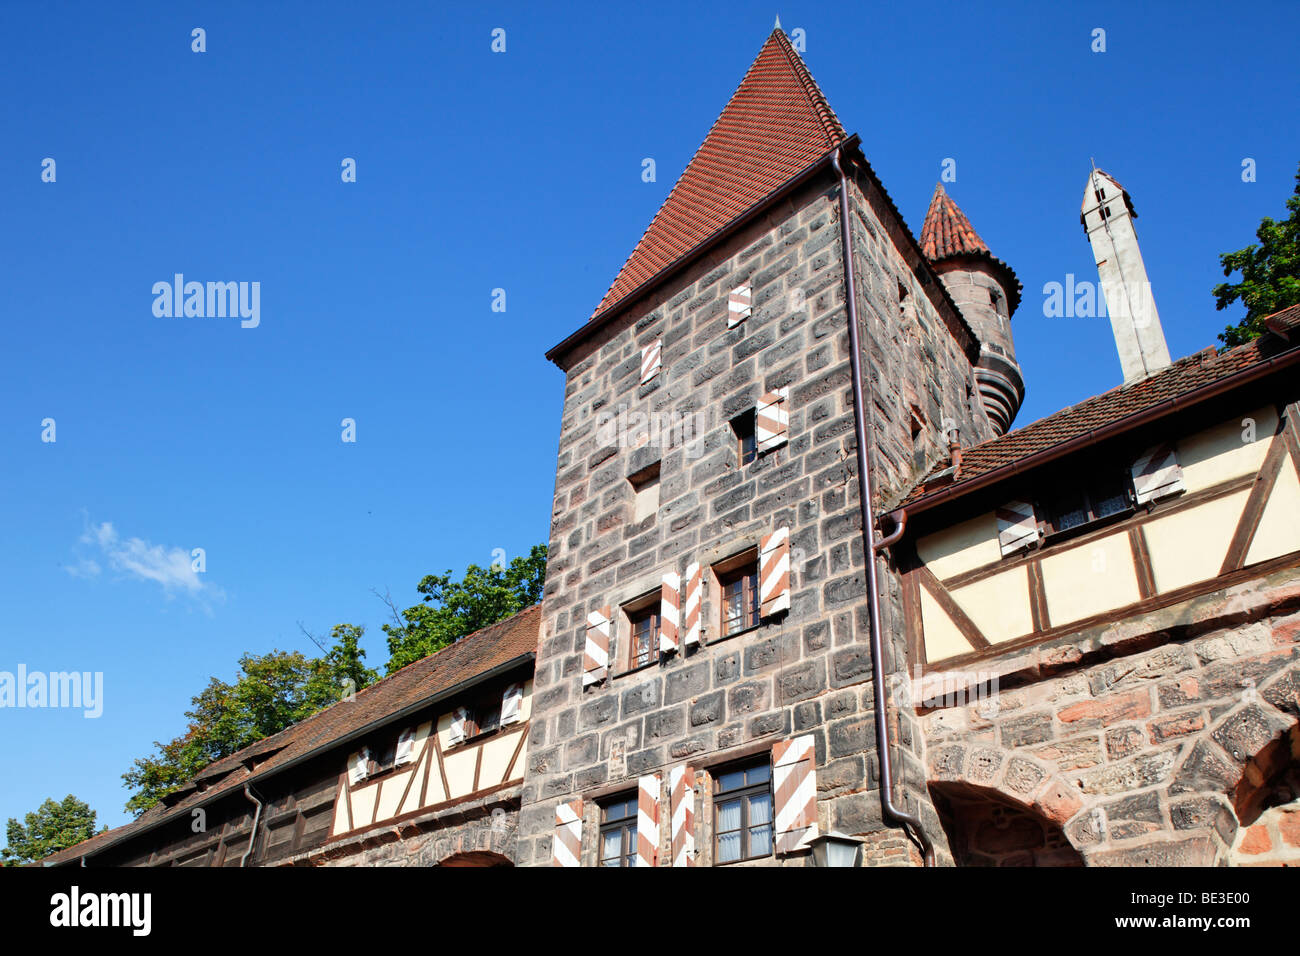 Spittlertorturm gate tower, city wall, inside, tower, half-timbered, old town, Nuremberg, Middle Franconia, Franconia, Bavaria, Stock Photo